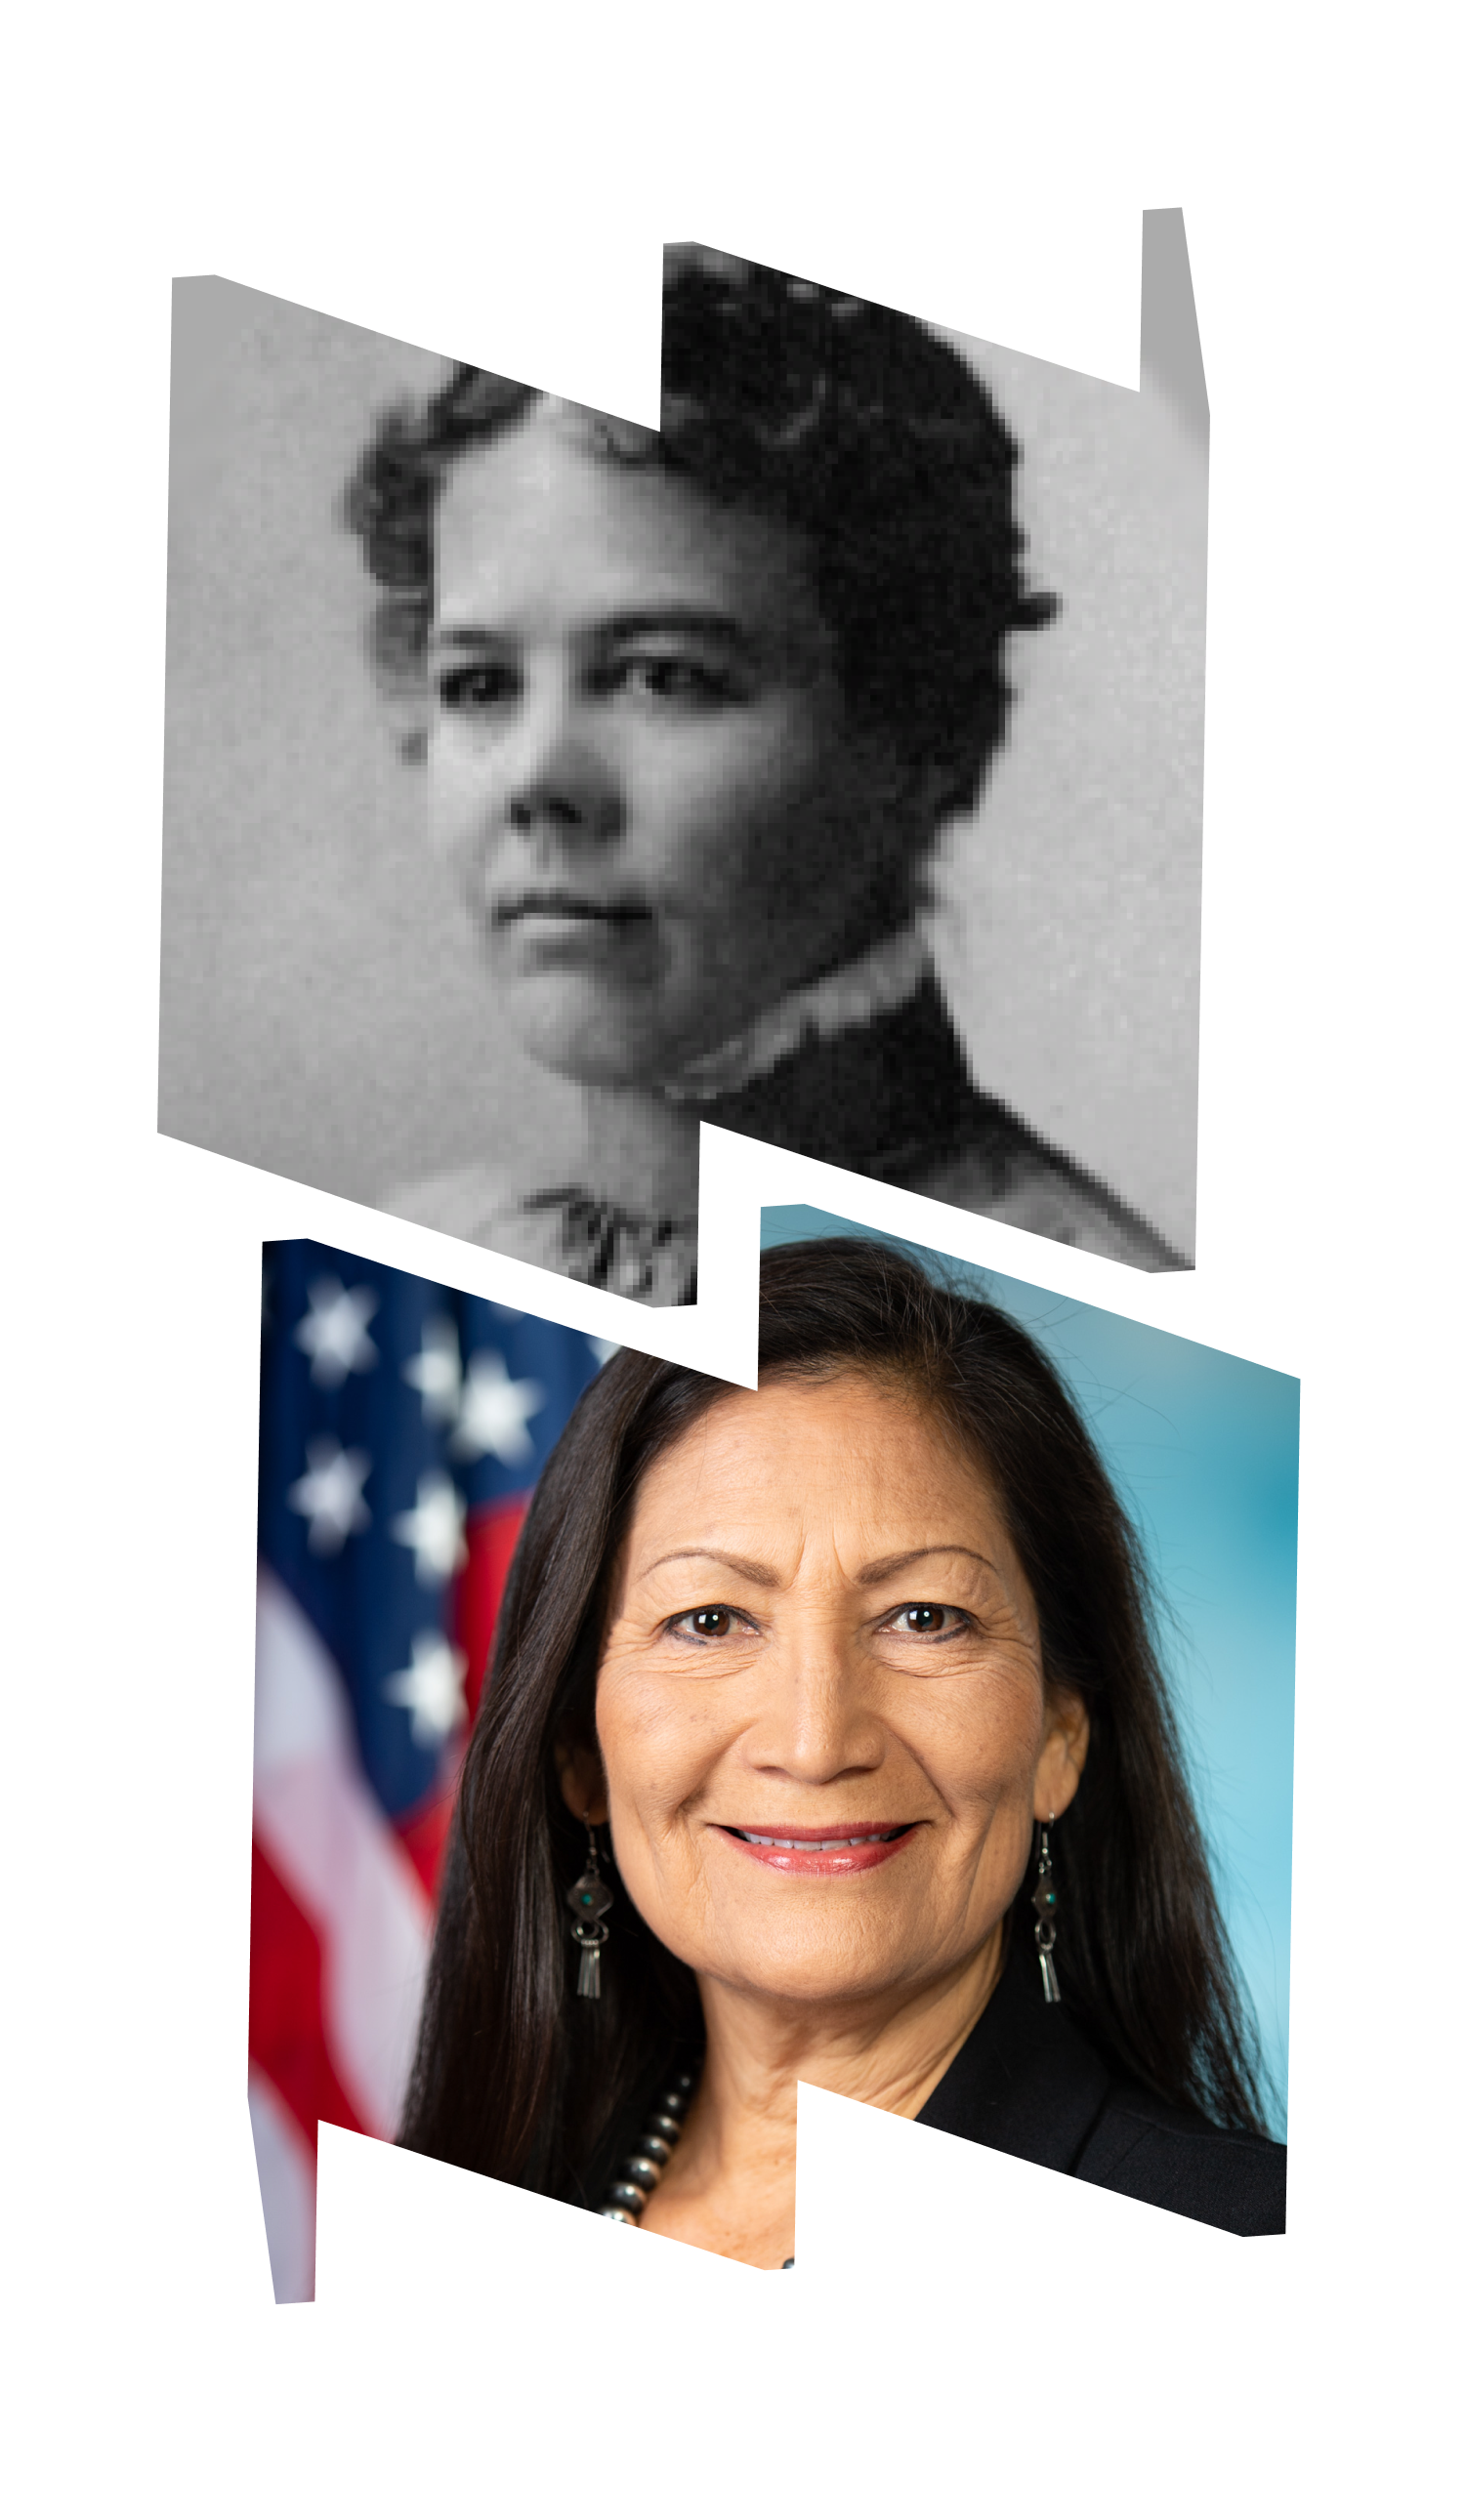 Top "W" frame with a black and white portrait of Lyda Conley; bottom "M" frame with color headshot of Deb Haaland in front of an American flag.